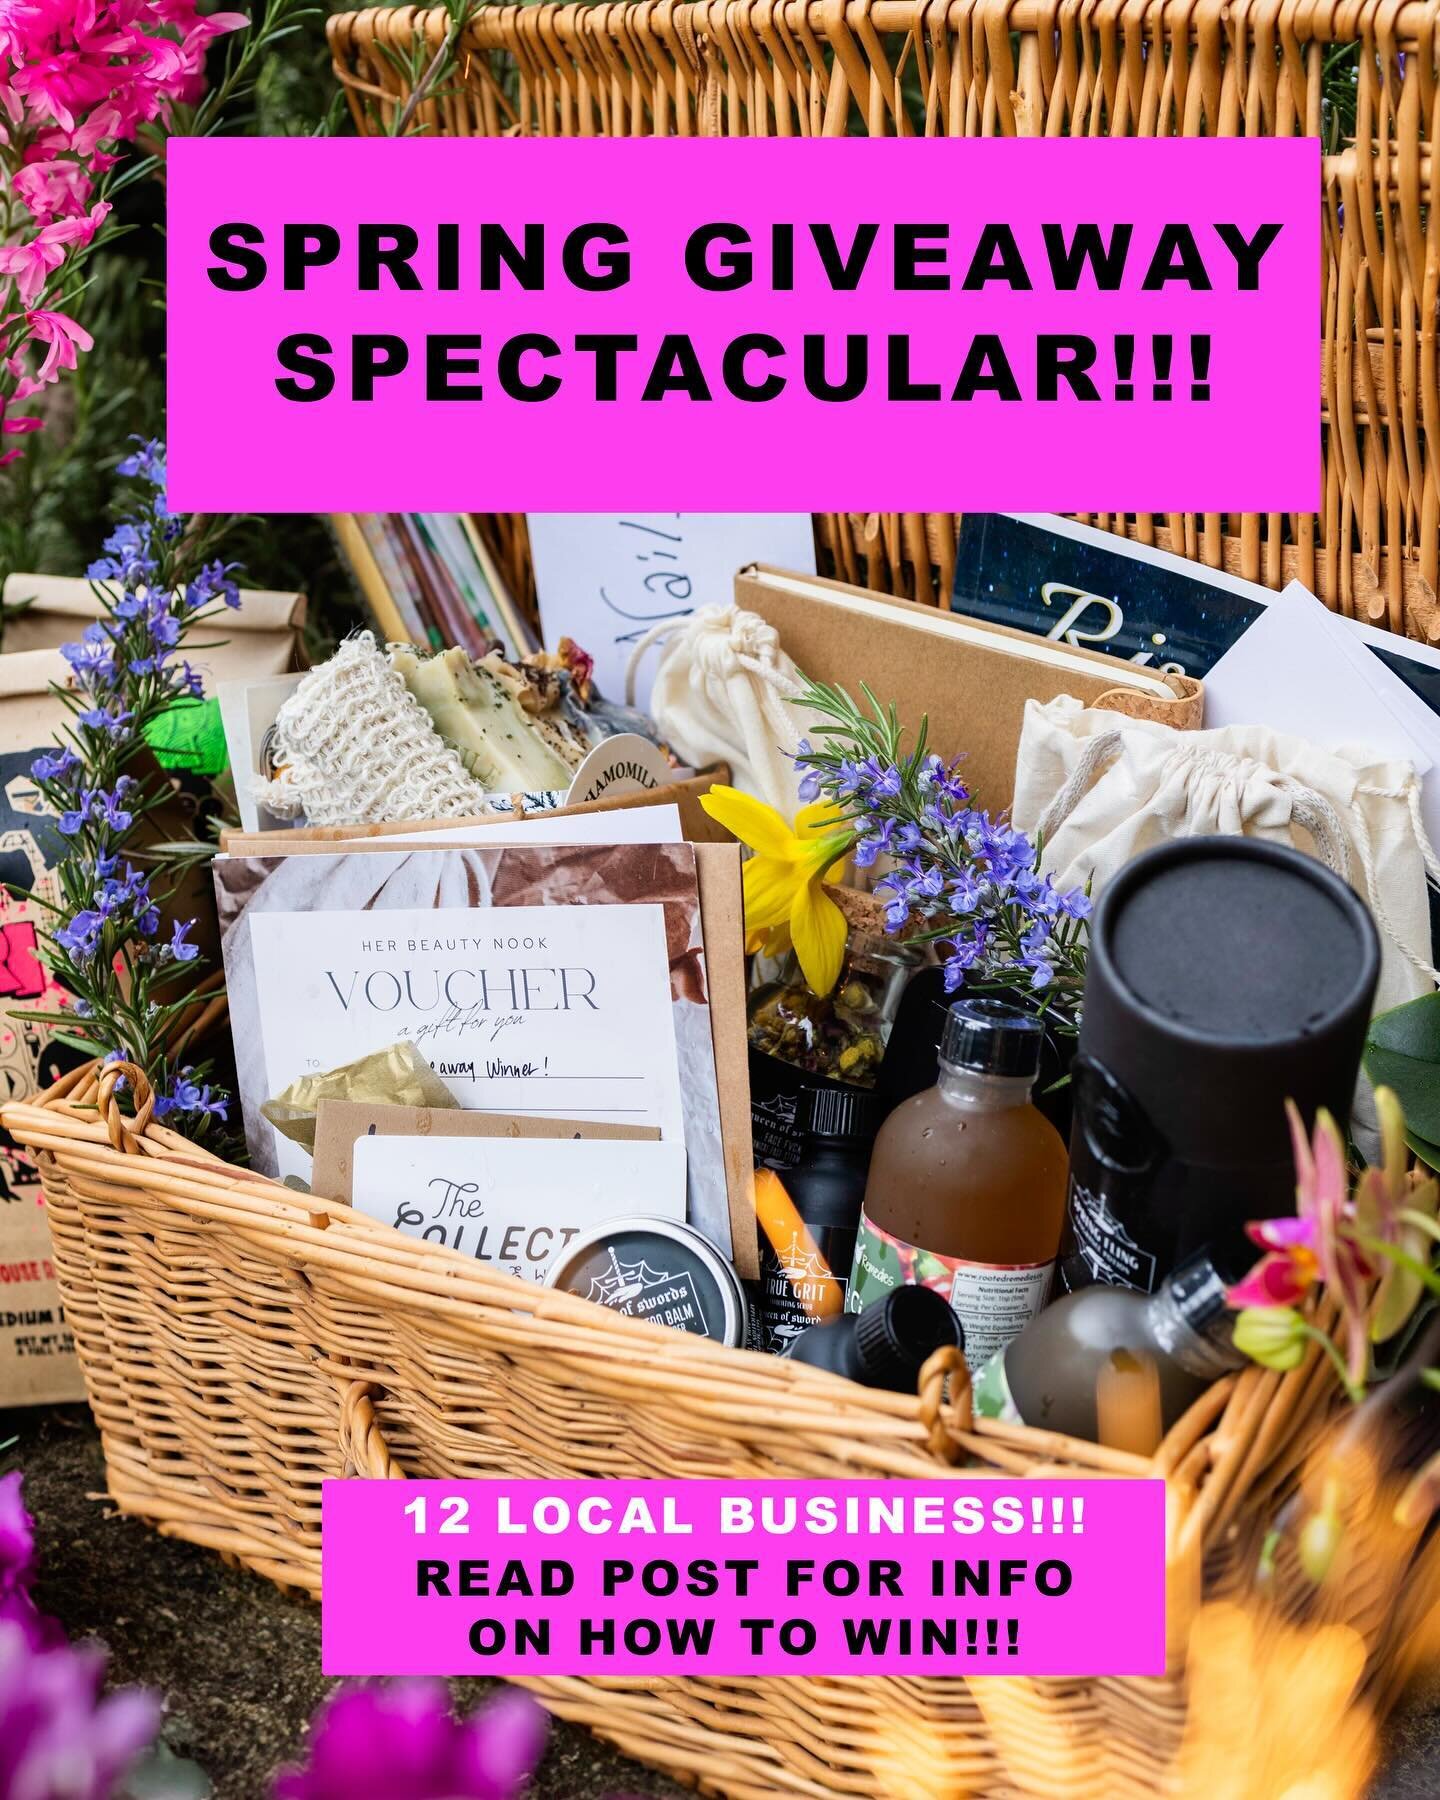 🌸✨ Join Our Spring Giveaway Spectacular! ✨🌸
Are you ready to welcome Spring with a bang? 🎉 We&rsquo;re thrilled to announce our Spring Giveaway SPECTACULAR, packed with goodies from TWELVE amazing local EUGENE businesses! 🌷We have decided this wa